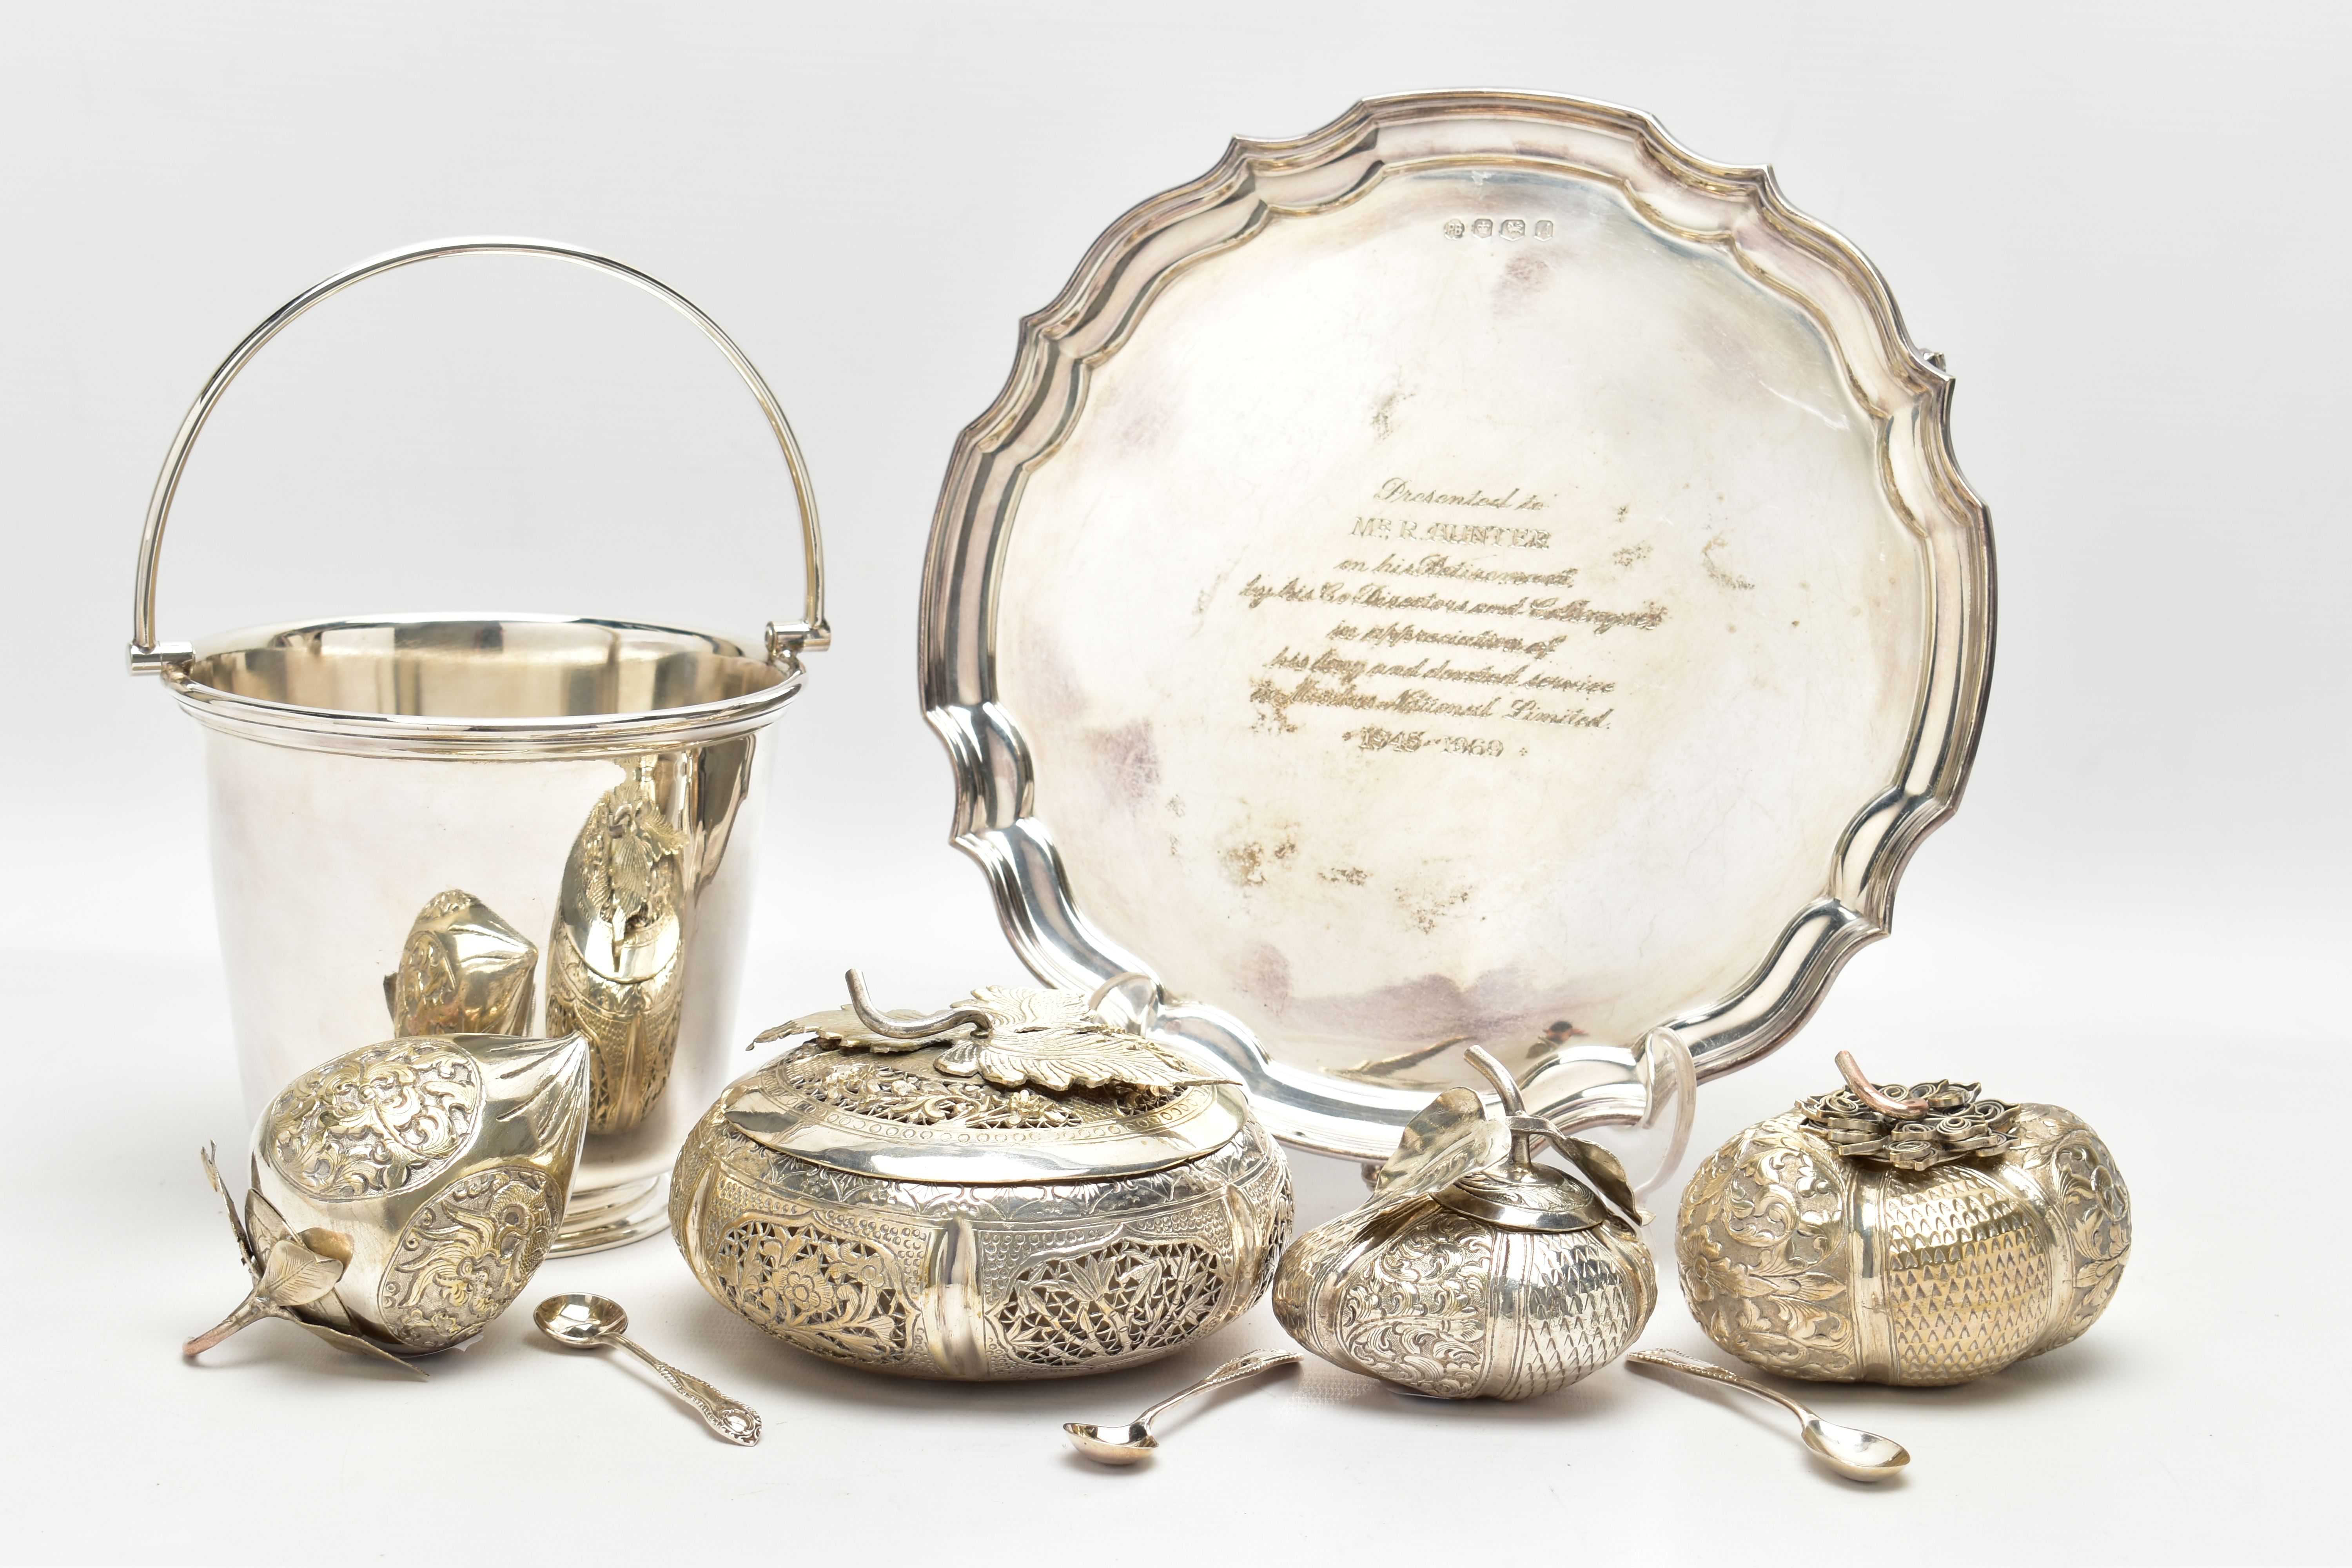 AN ELIZABETH II SILVER SALVER, TOGETHER WITH EIGHT SILVER PLATED ITEMS, the silver salver with